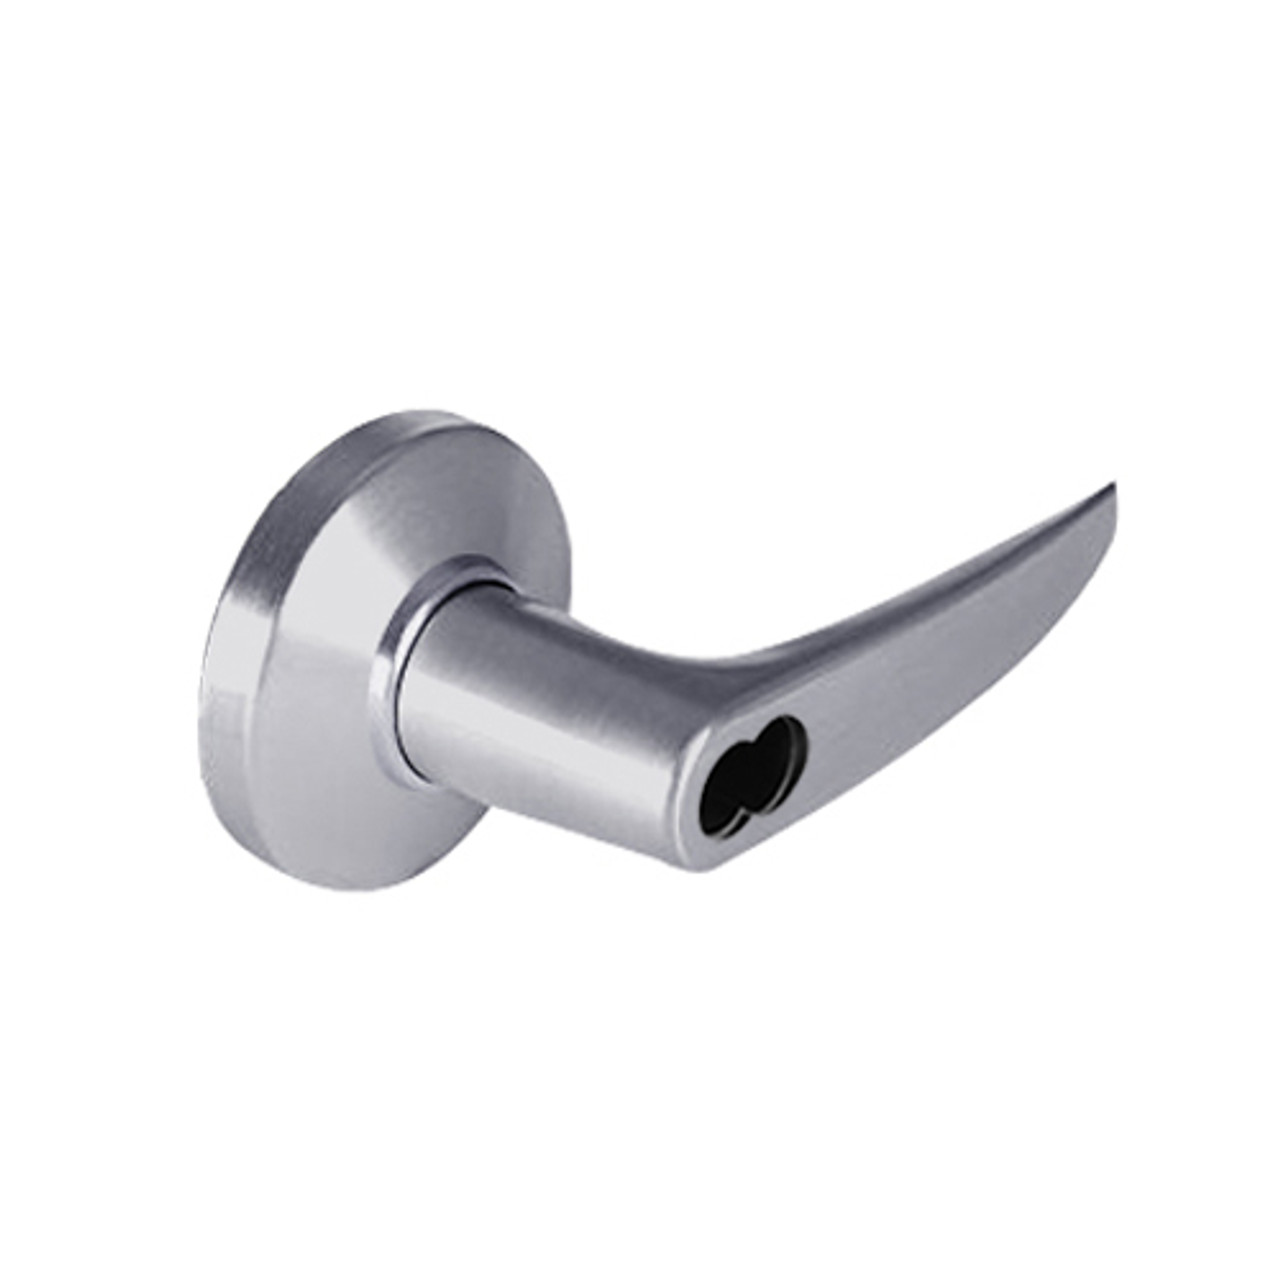 9K47AB16CSTK626 Best 9K Series Entrance Cylindrical Lever Locks with Curved without Return Lever Design Accept 7 Pin Best Core in Satin Chrome